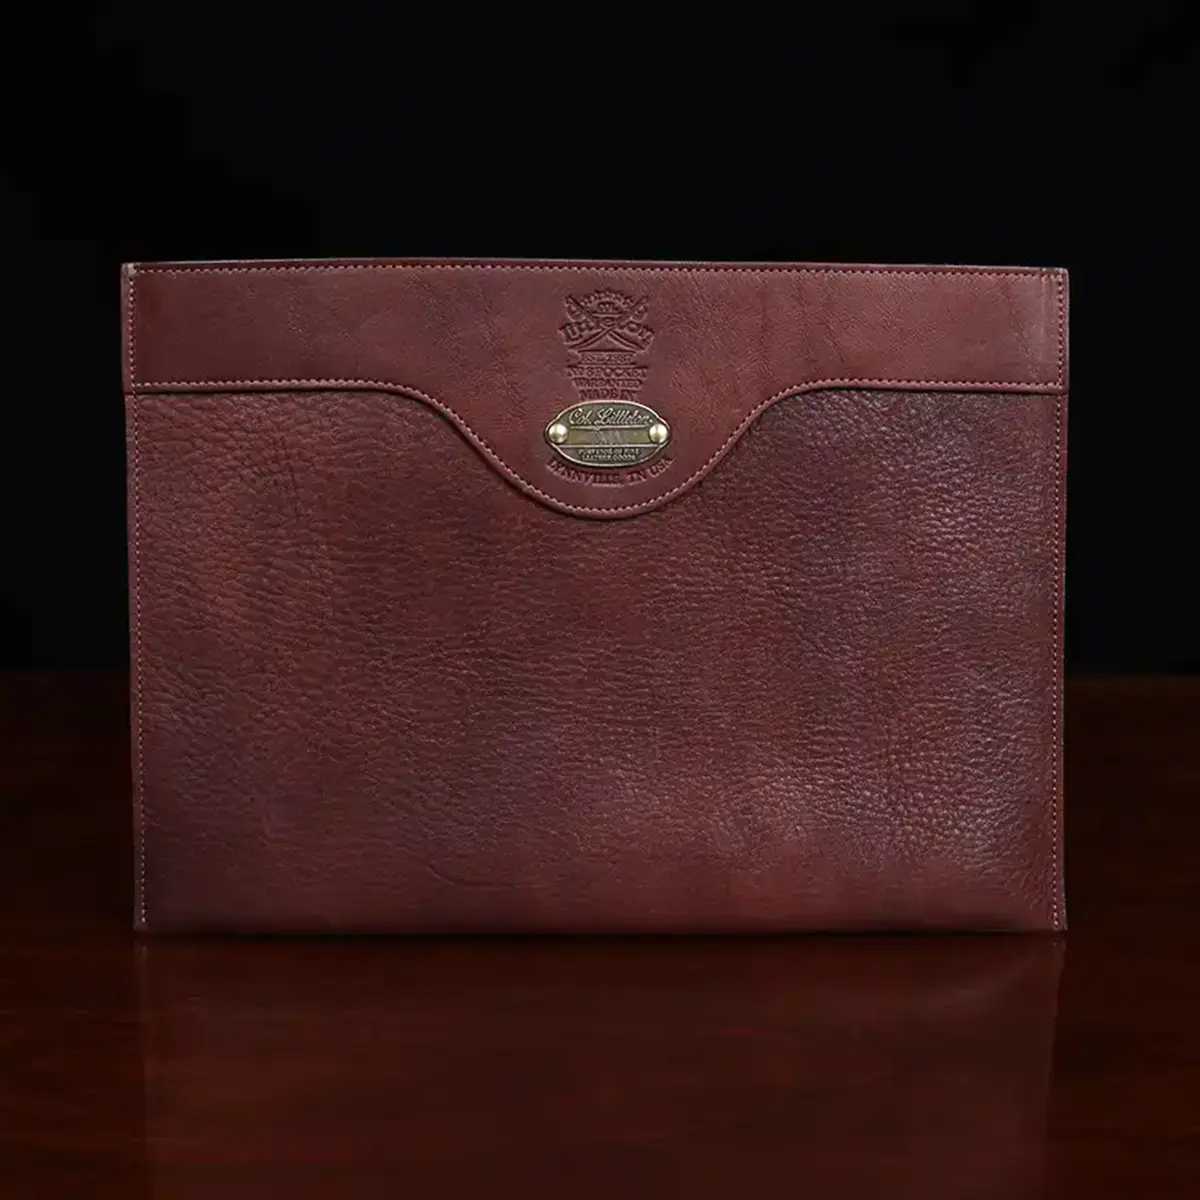 no 11 pocket in vintage brown showing the front